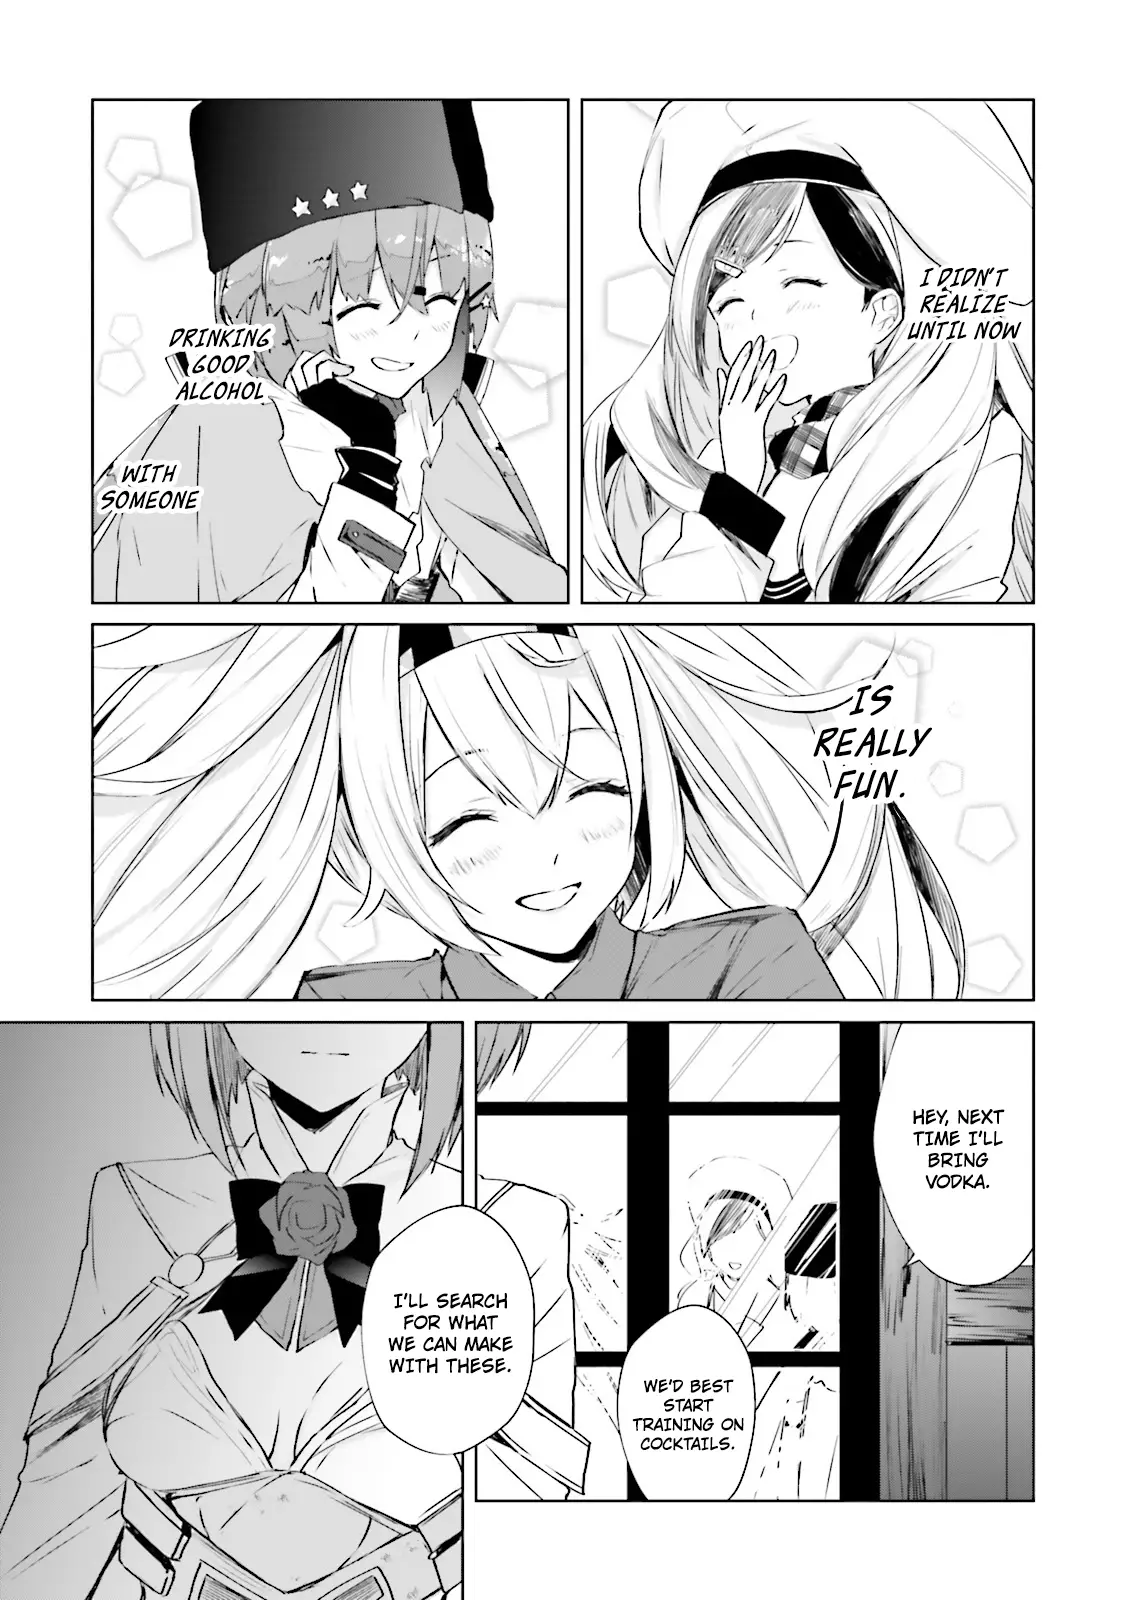 Kantai Collection -Kancolle- Tonight, Another "salute"! - 3 page 22